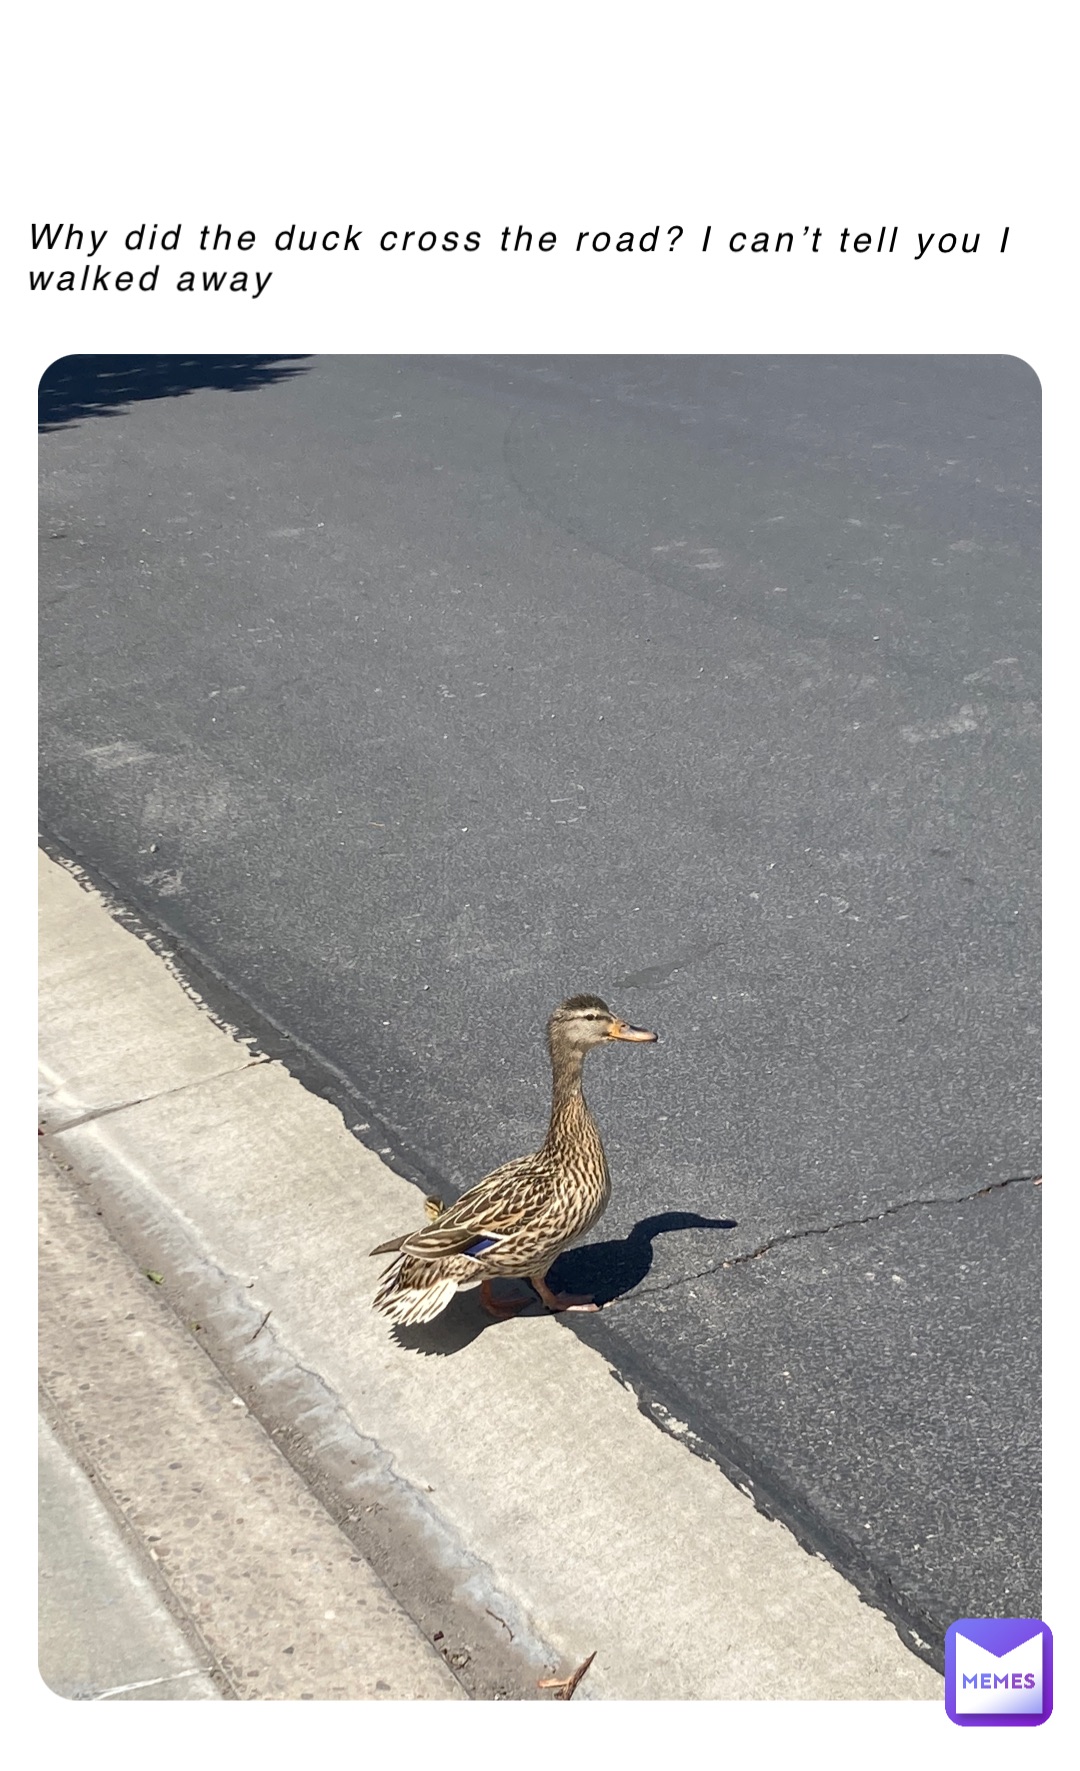 Why did the duck cross the road? I can’t tell you I walked away